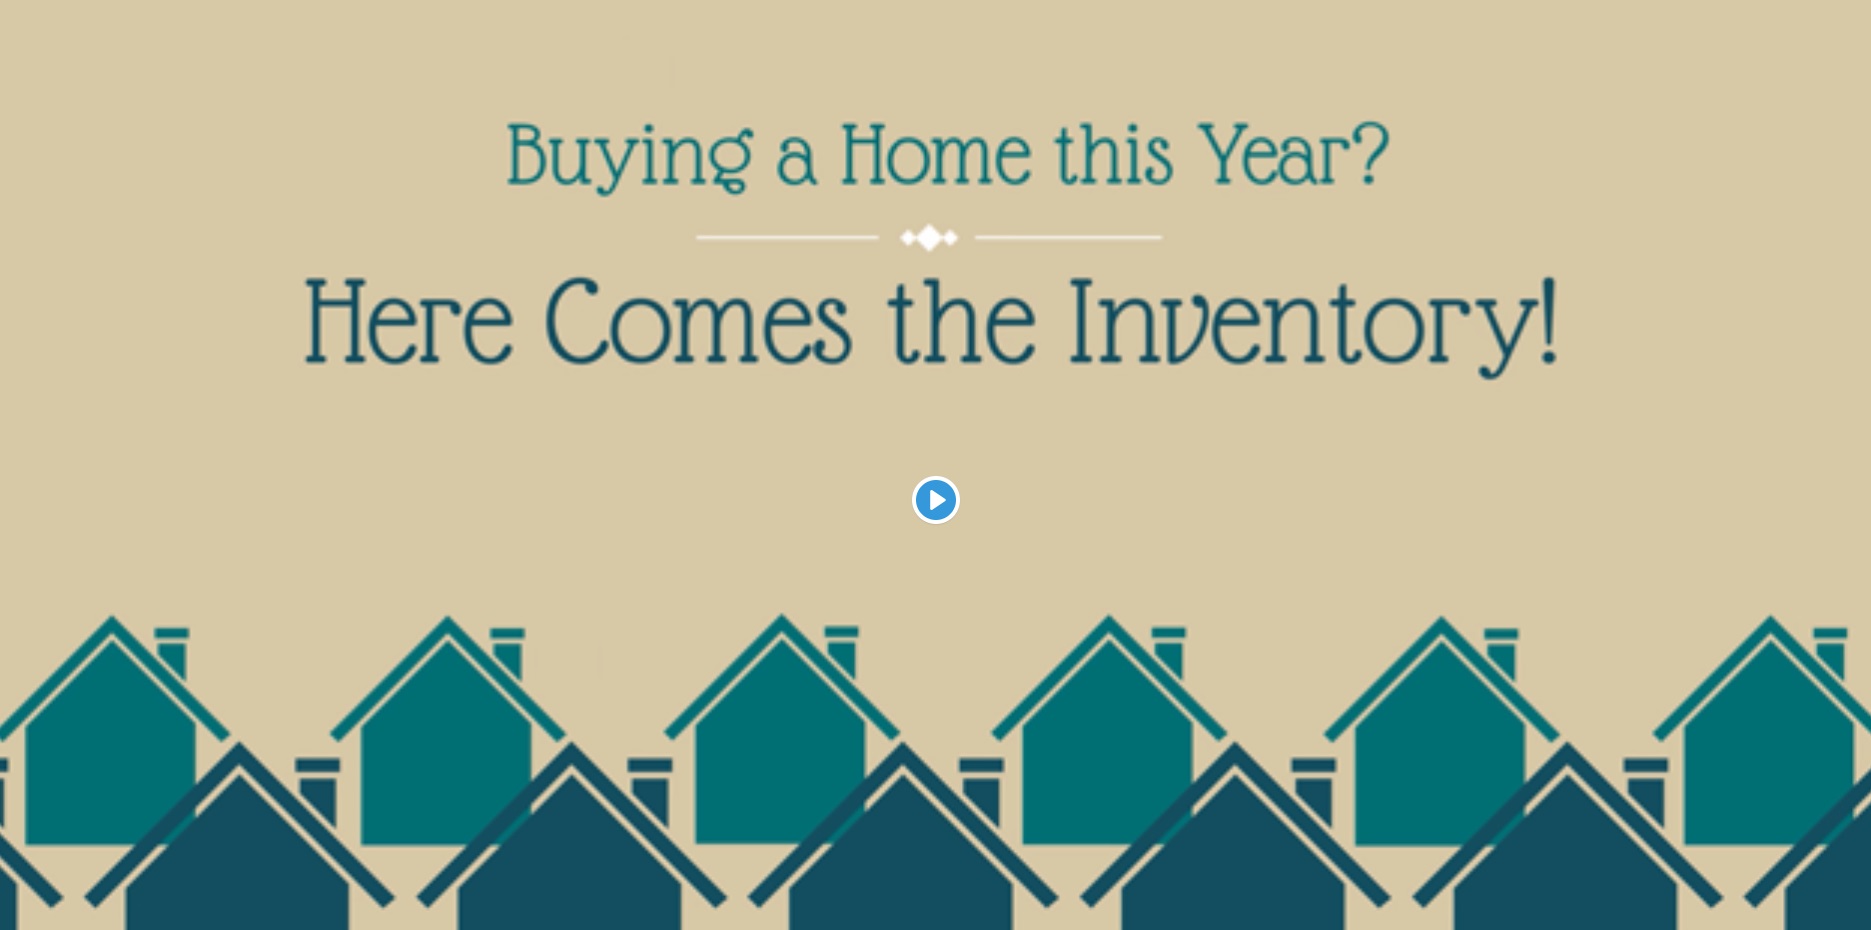 Buying a Home this Year? Here Comes the Inventory!